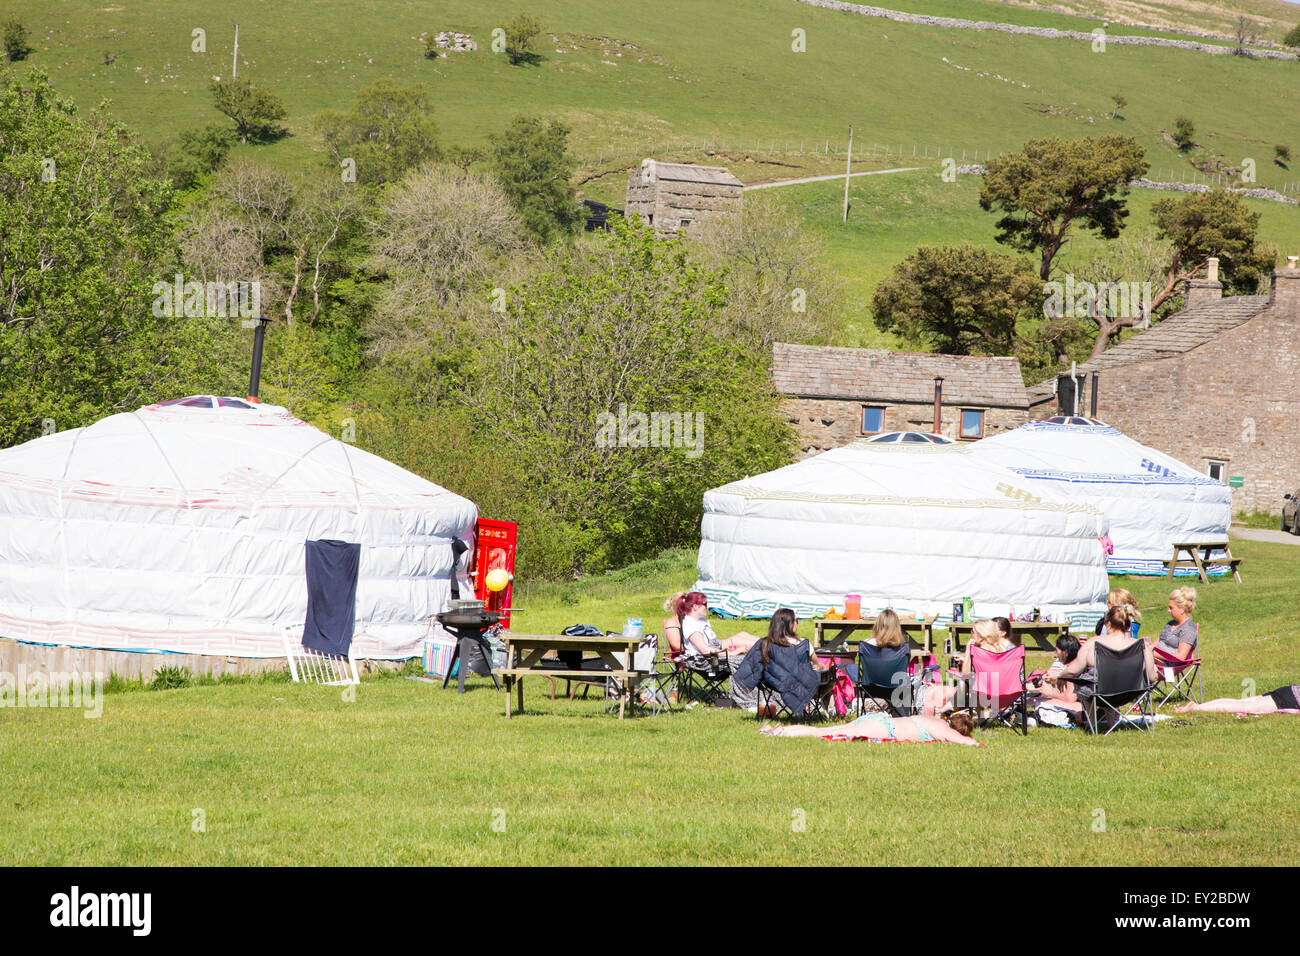 A group of ladies enjoying the outdoors on a Yurt campsite, Yorkshire Dales National Park, North Yorkshire, England, UK Stock Photo